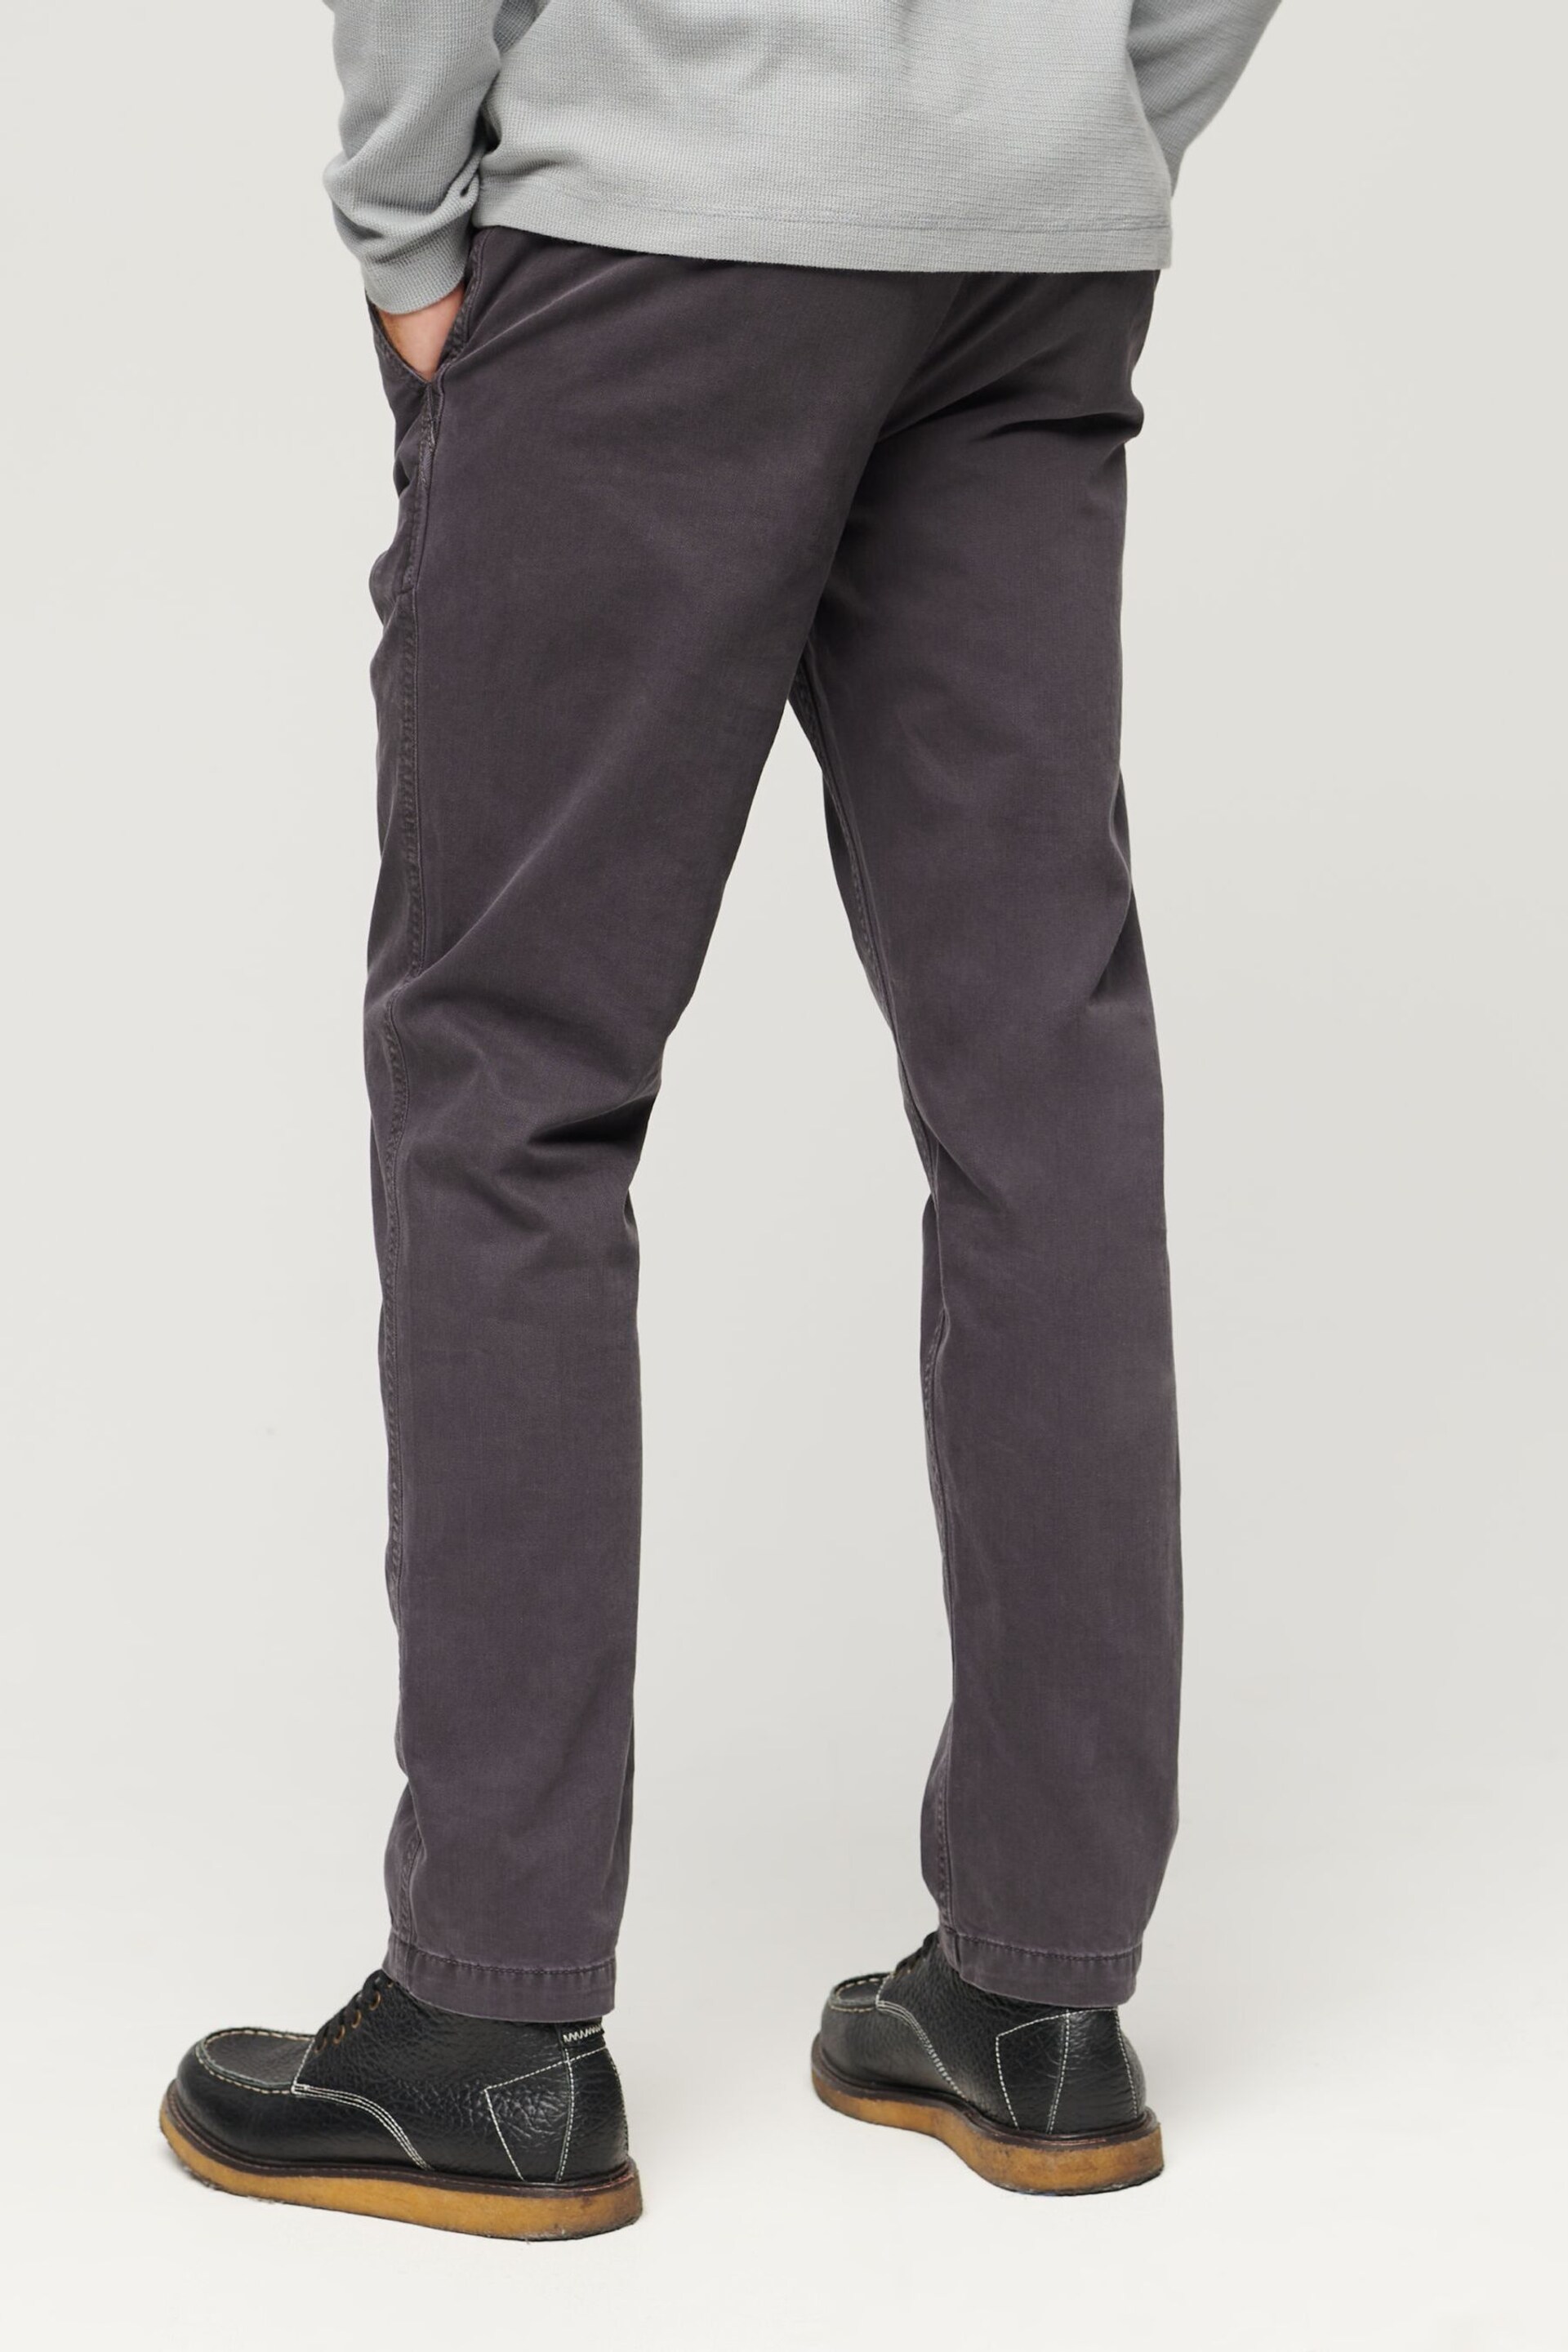 Superdry Grey Slim Officers Chinos Trousers - Image 2 of 7